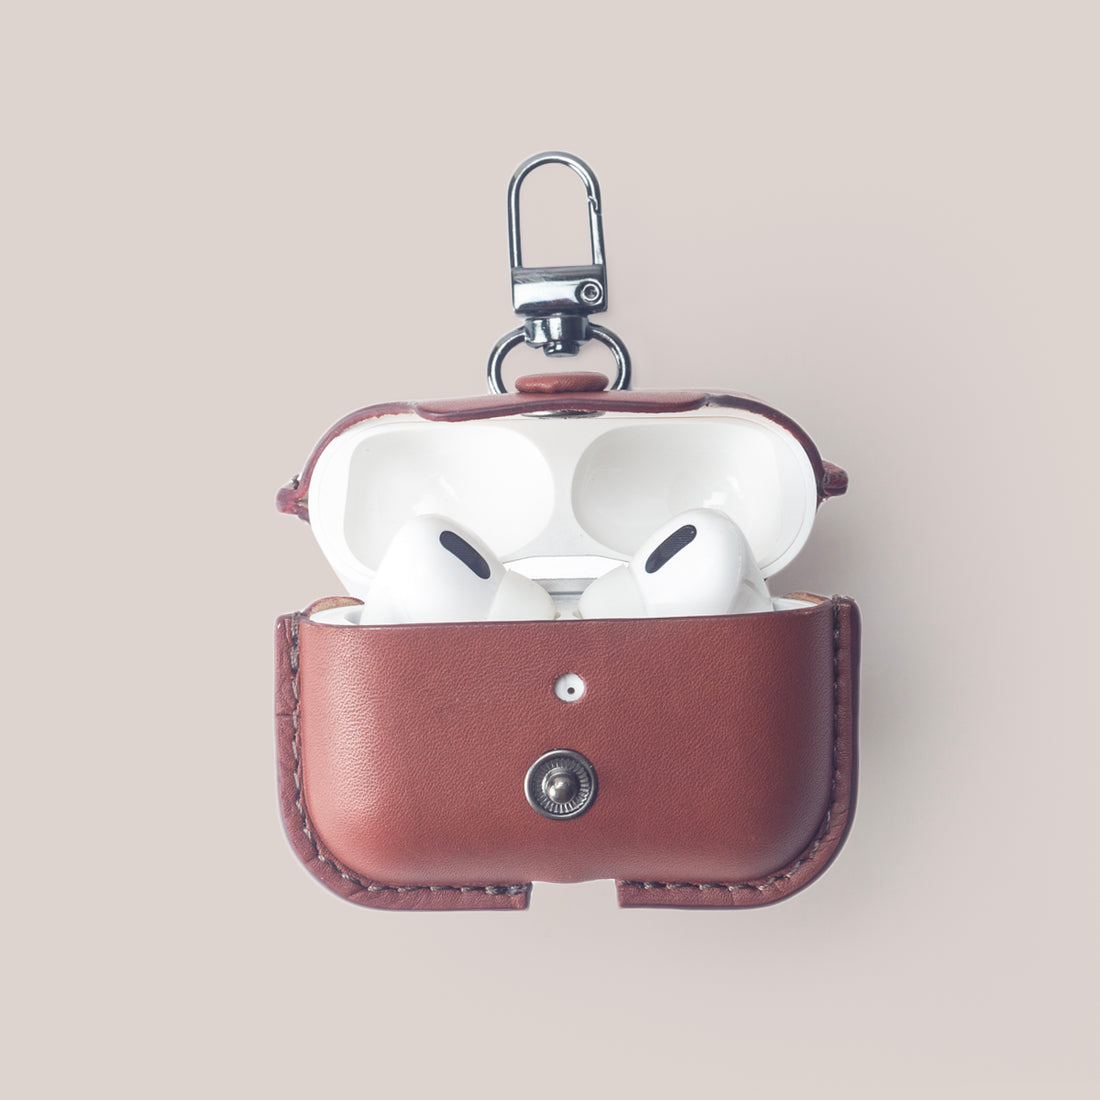 Leather AirPods Pro 1, AirPods Pro 2 Case - Vintage Tan